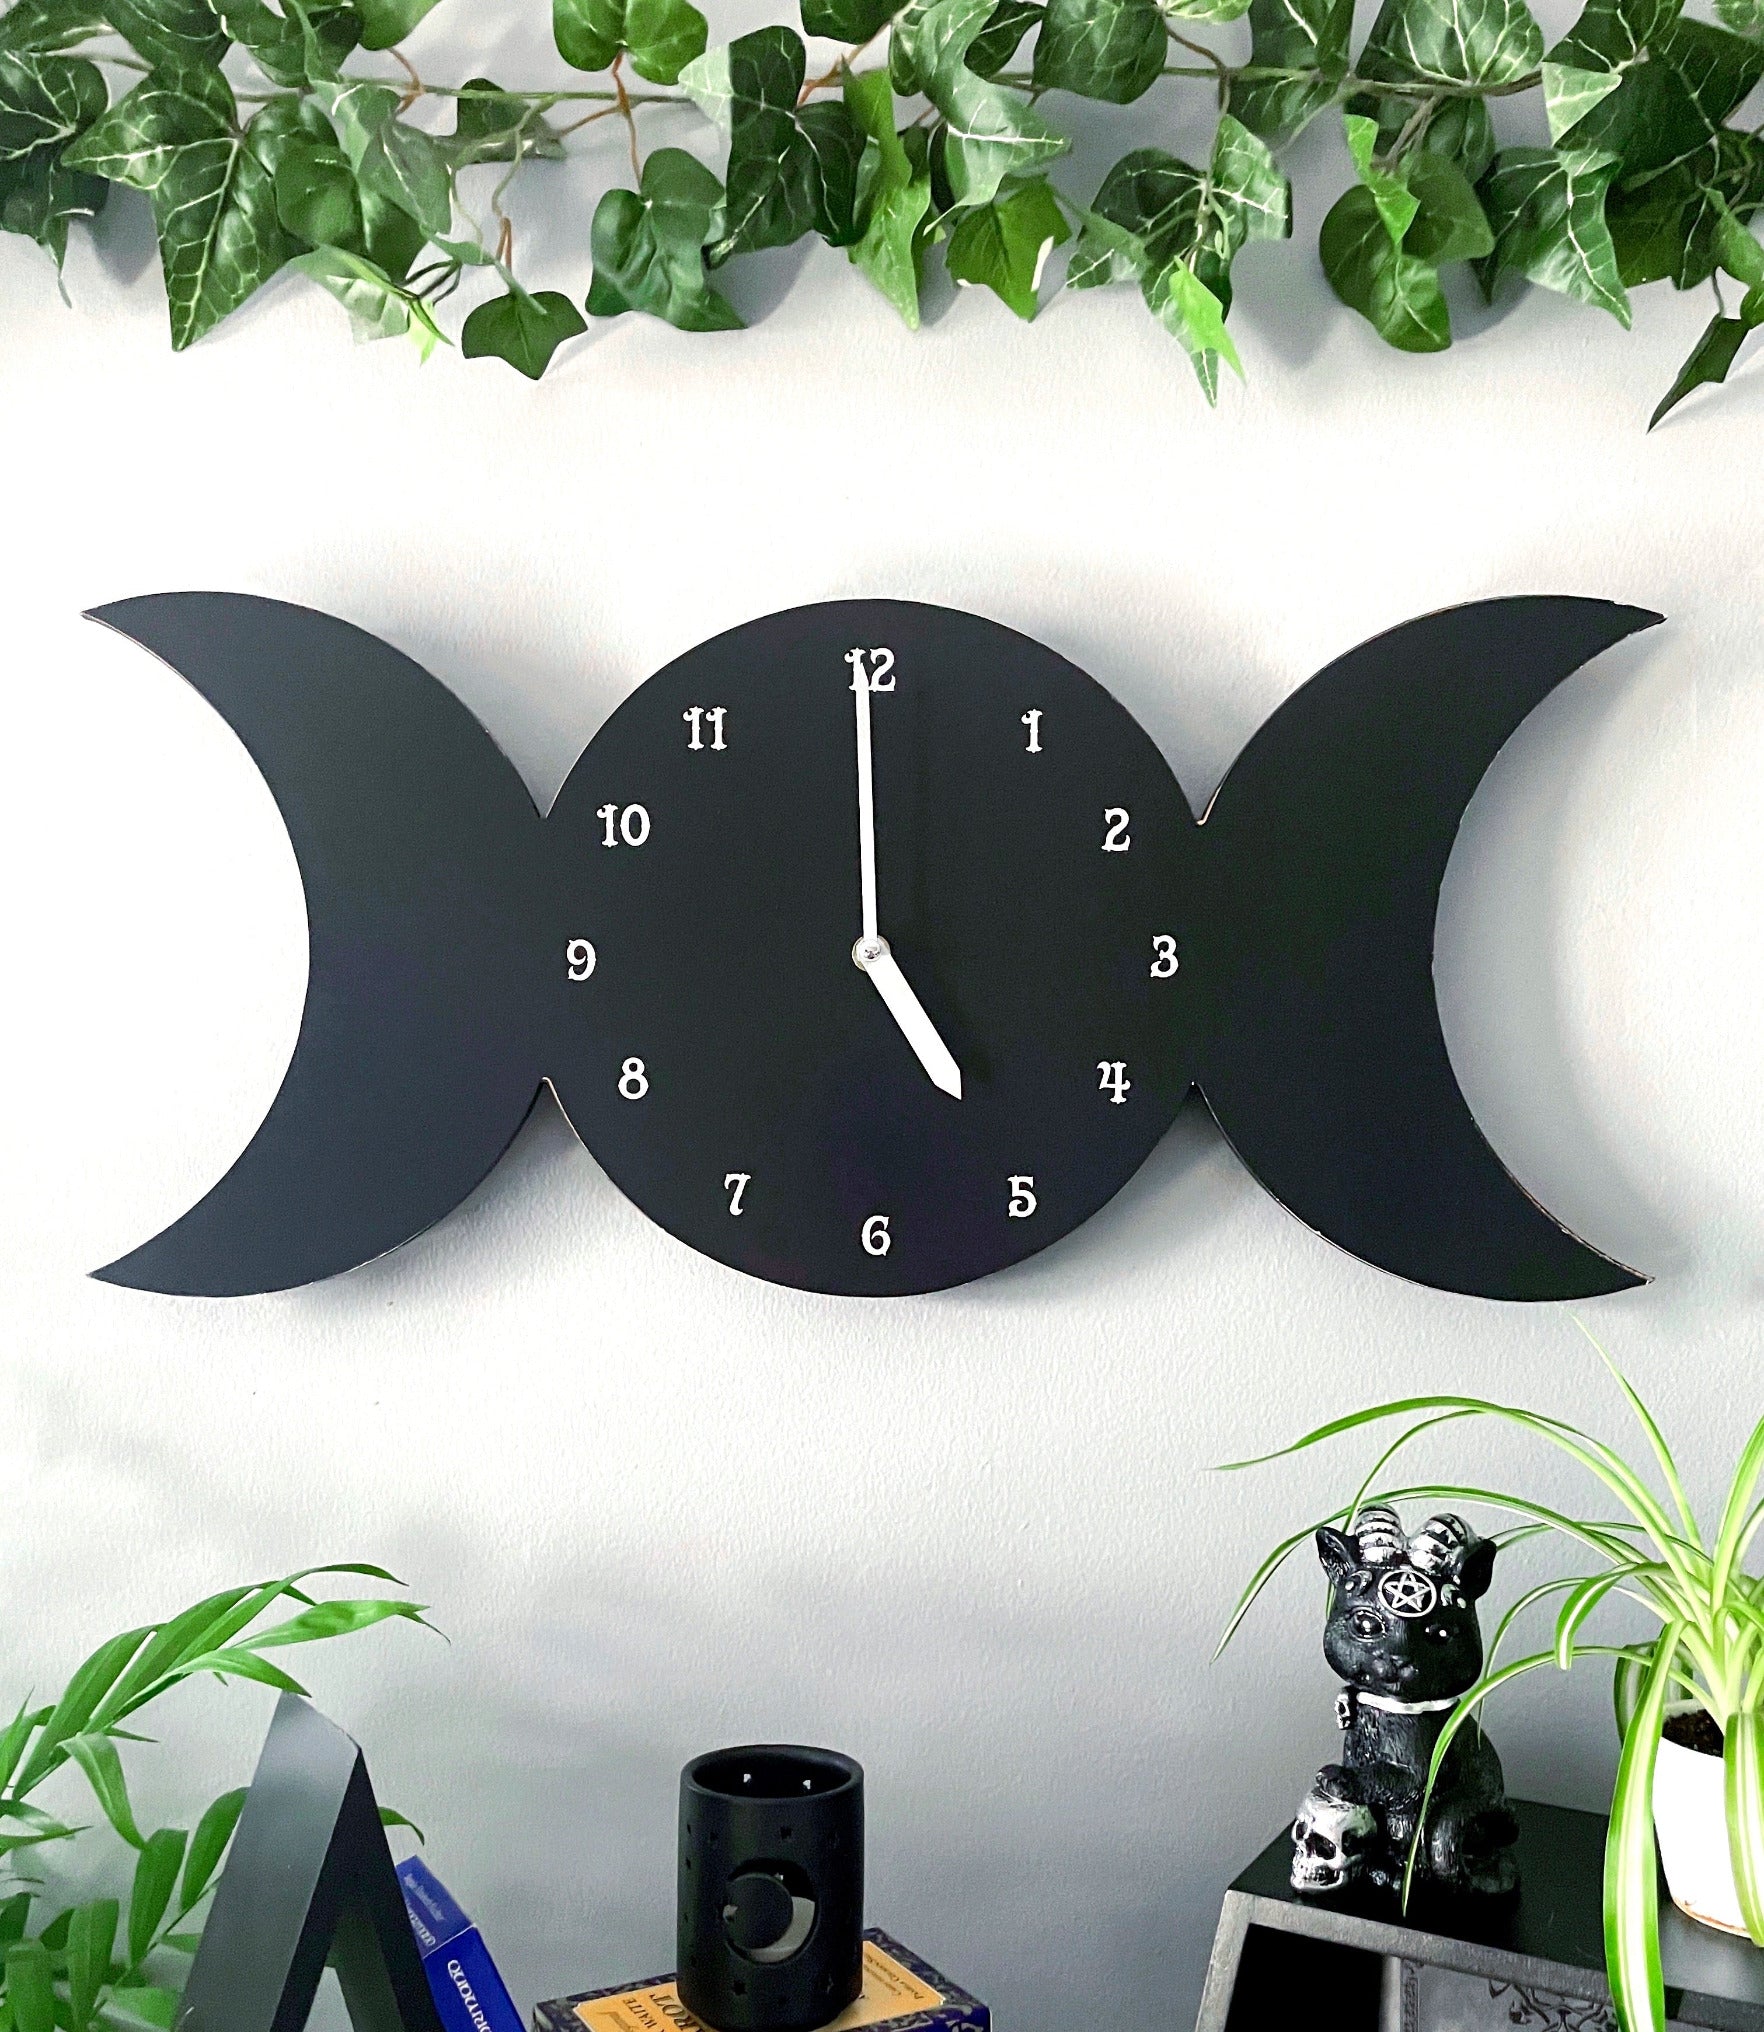 Pictured is a wall clock in the shape of a triple moon with the moon phases on it.